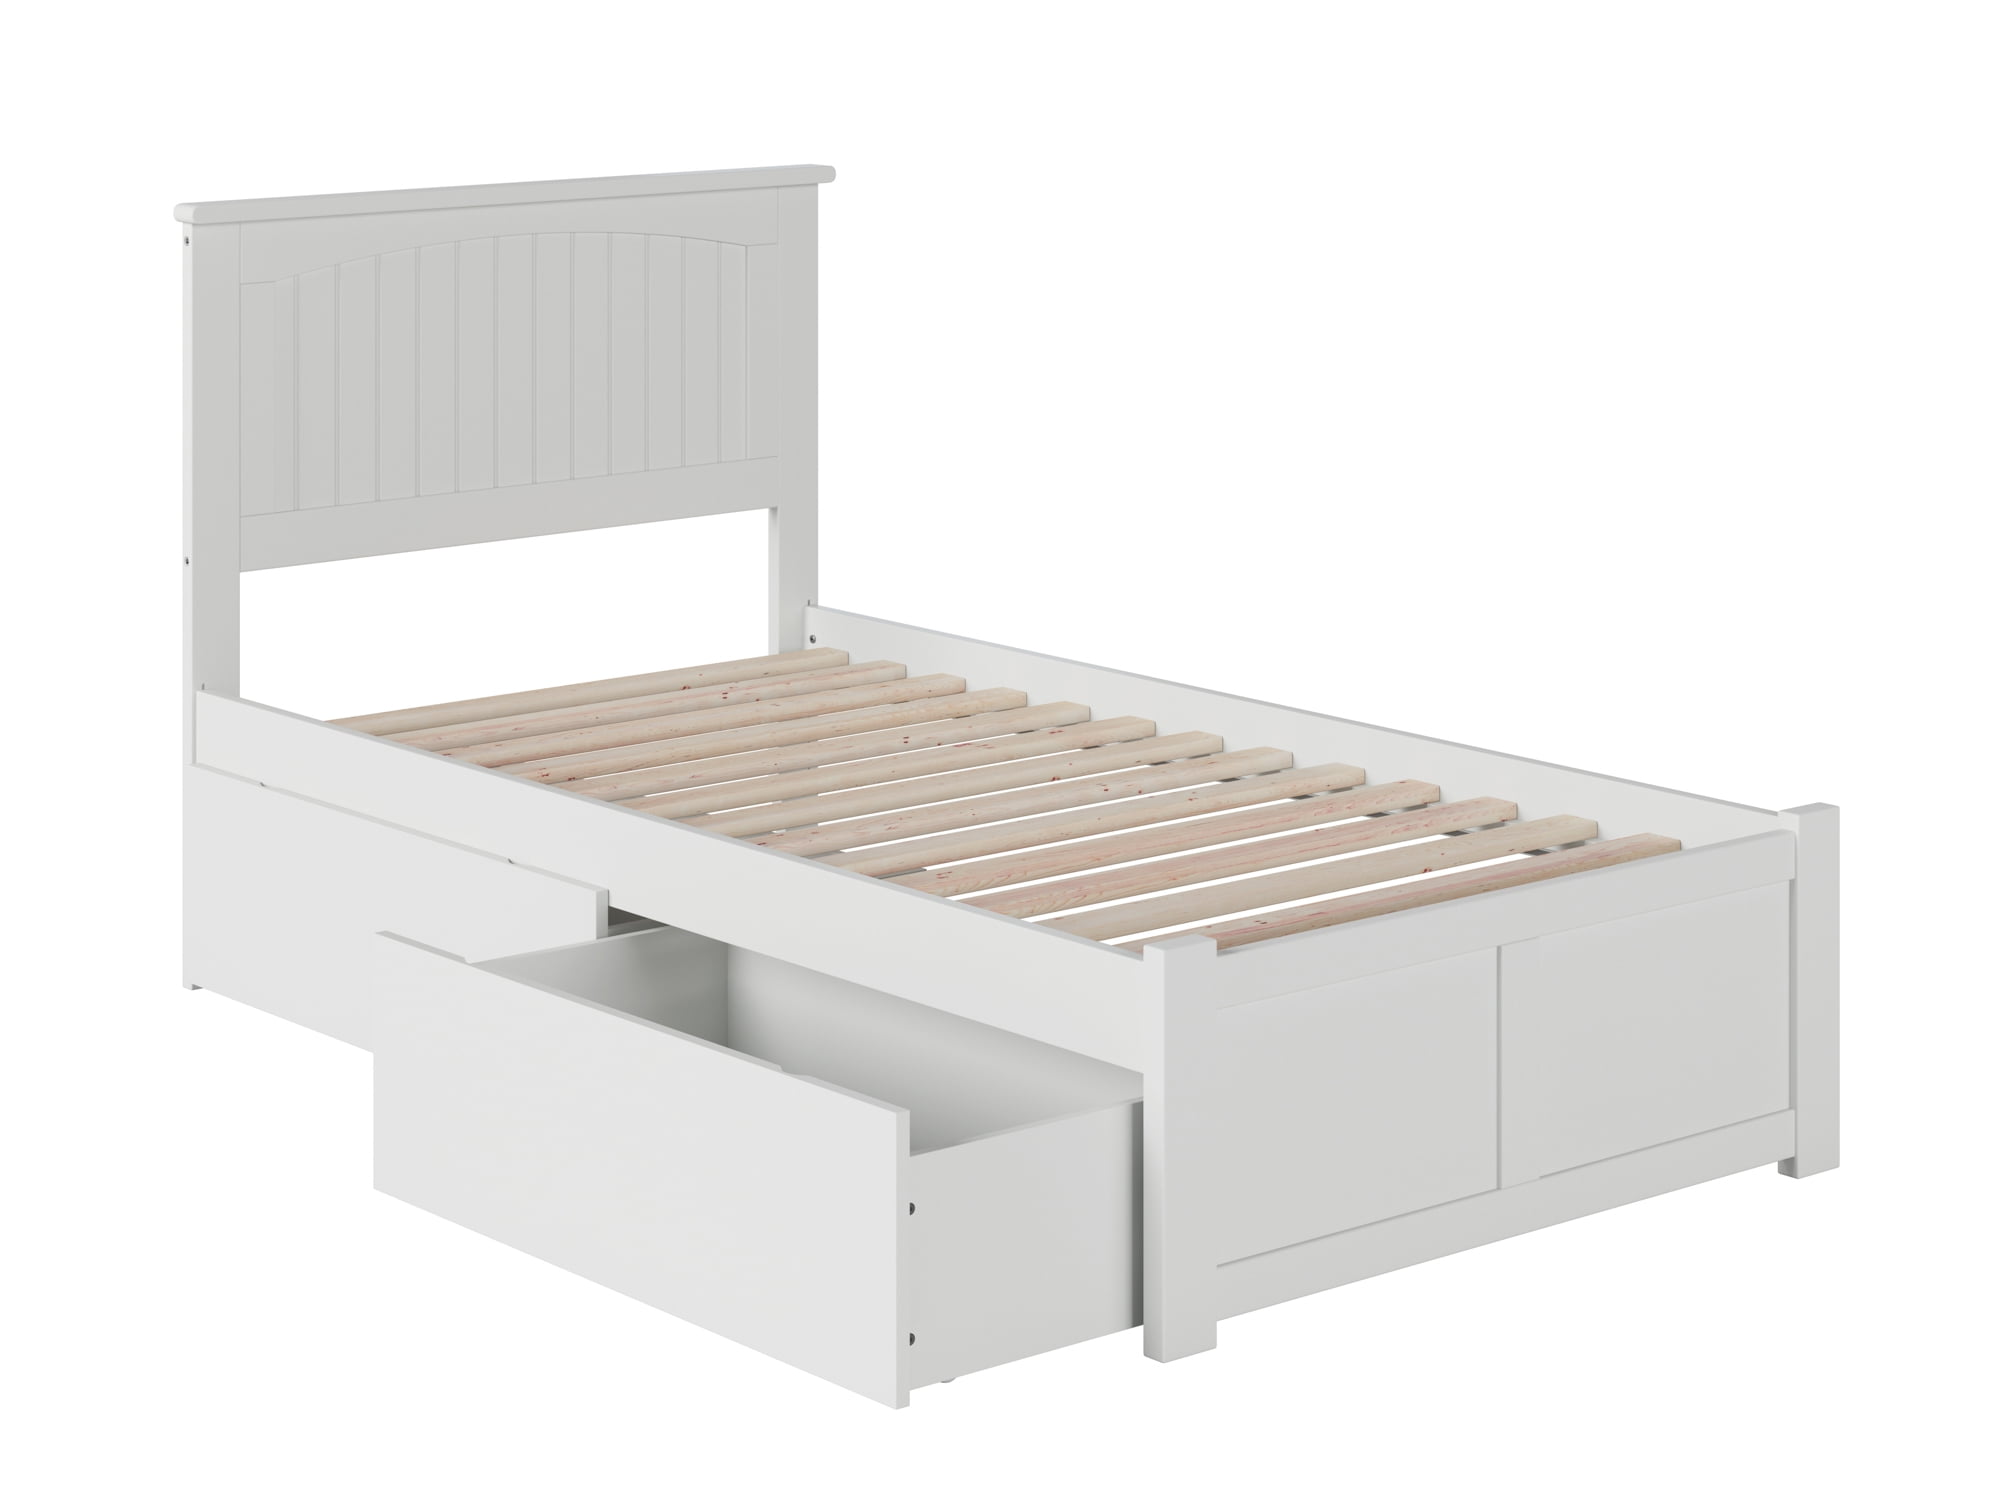 Picture of Atlantic Furniture AR8212112 Nantucket Panel Footboard & Urban Bed Drawers, White - Twin Extra Large